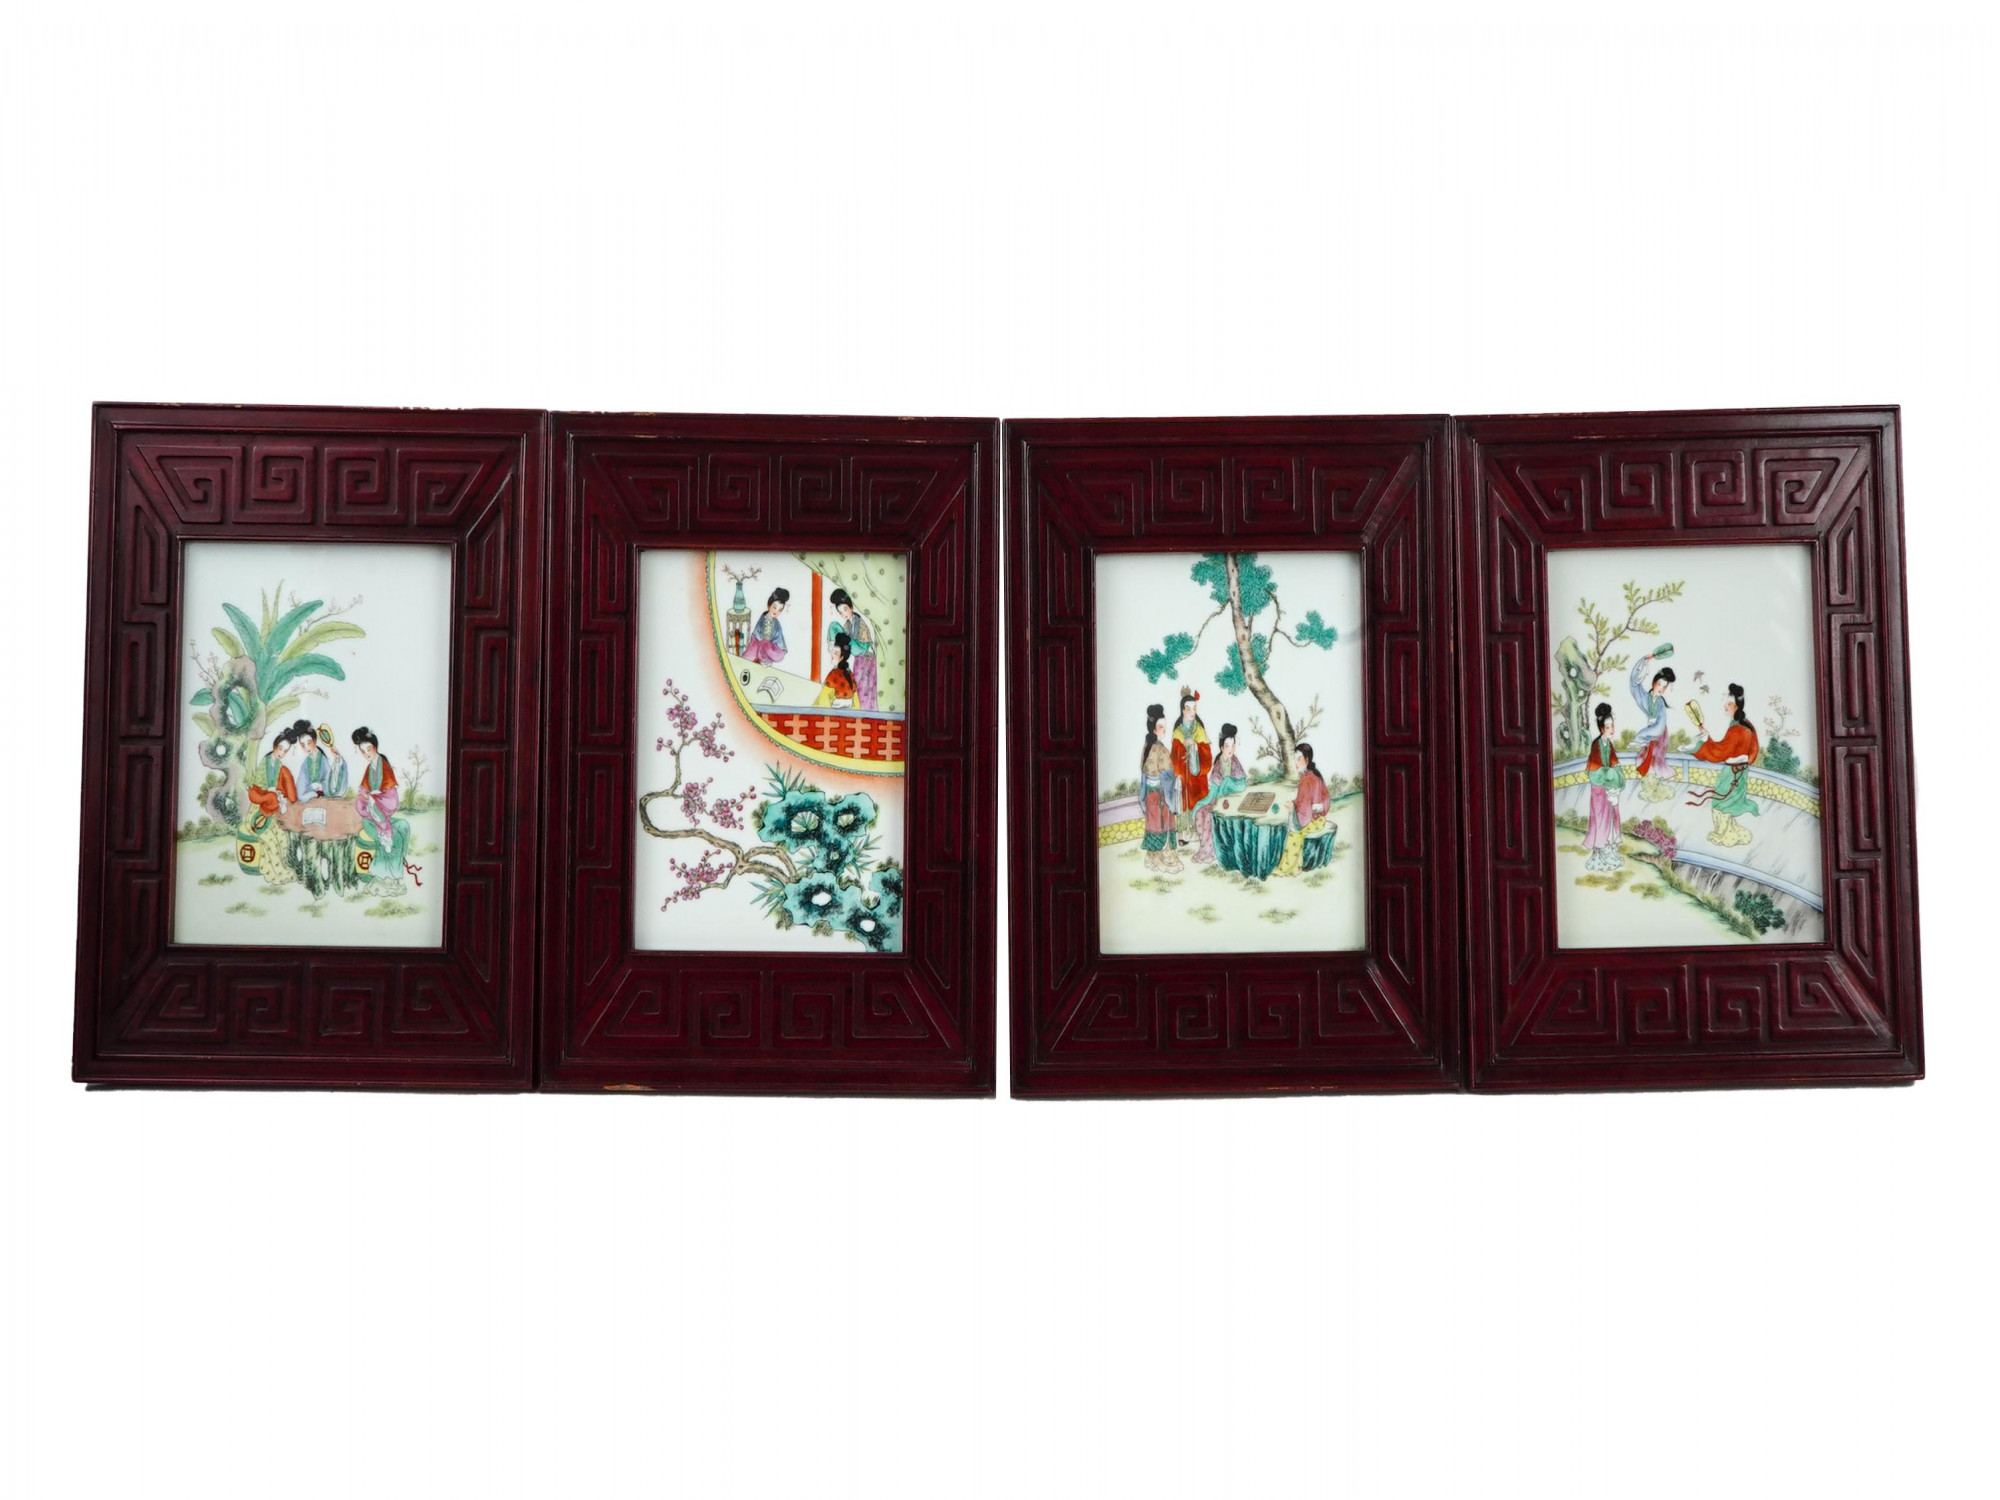 CHINESE REPUBLIC PERIOD PORCELAIN PAINTINGS SET